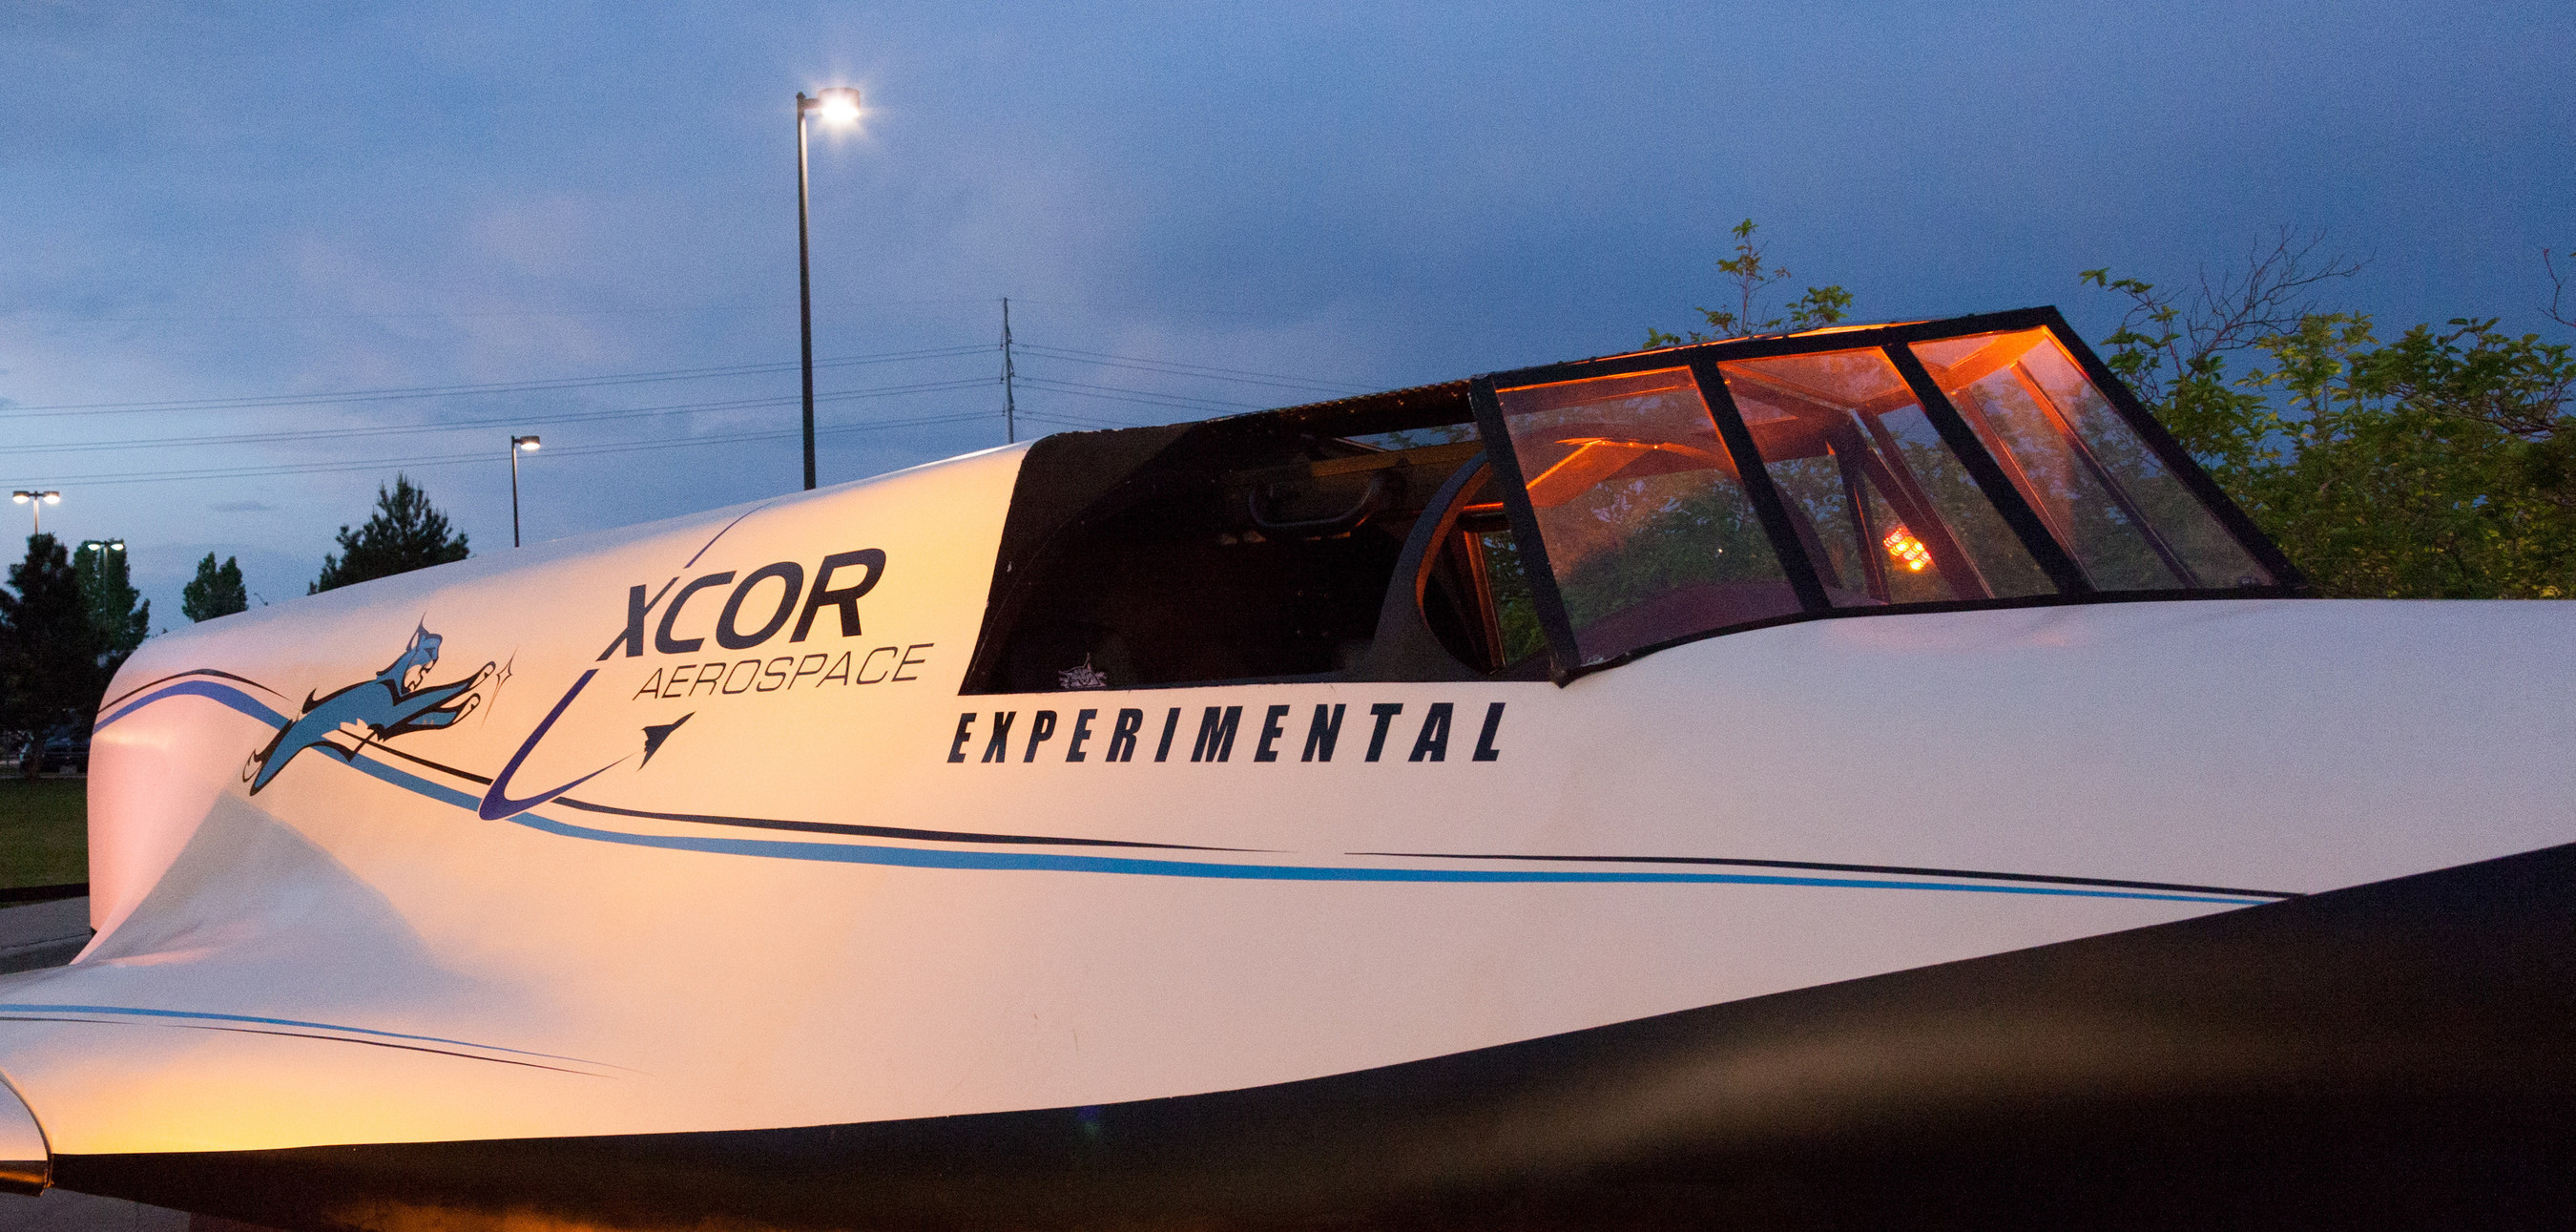 The XCOR Lynx Spacecraft full scale model will be on display at the AGU 2014 Fall Meeting in San Francisco, CA.